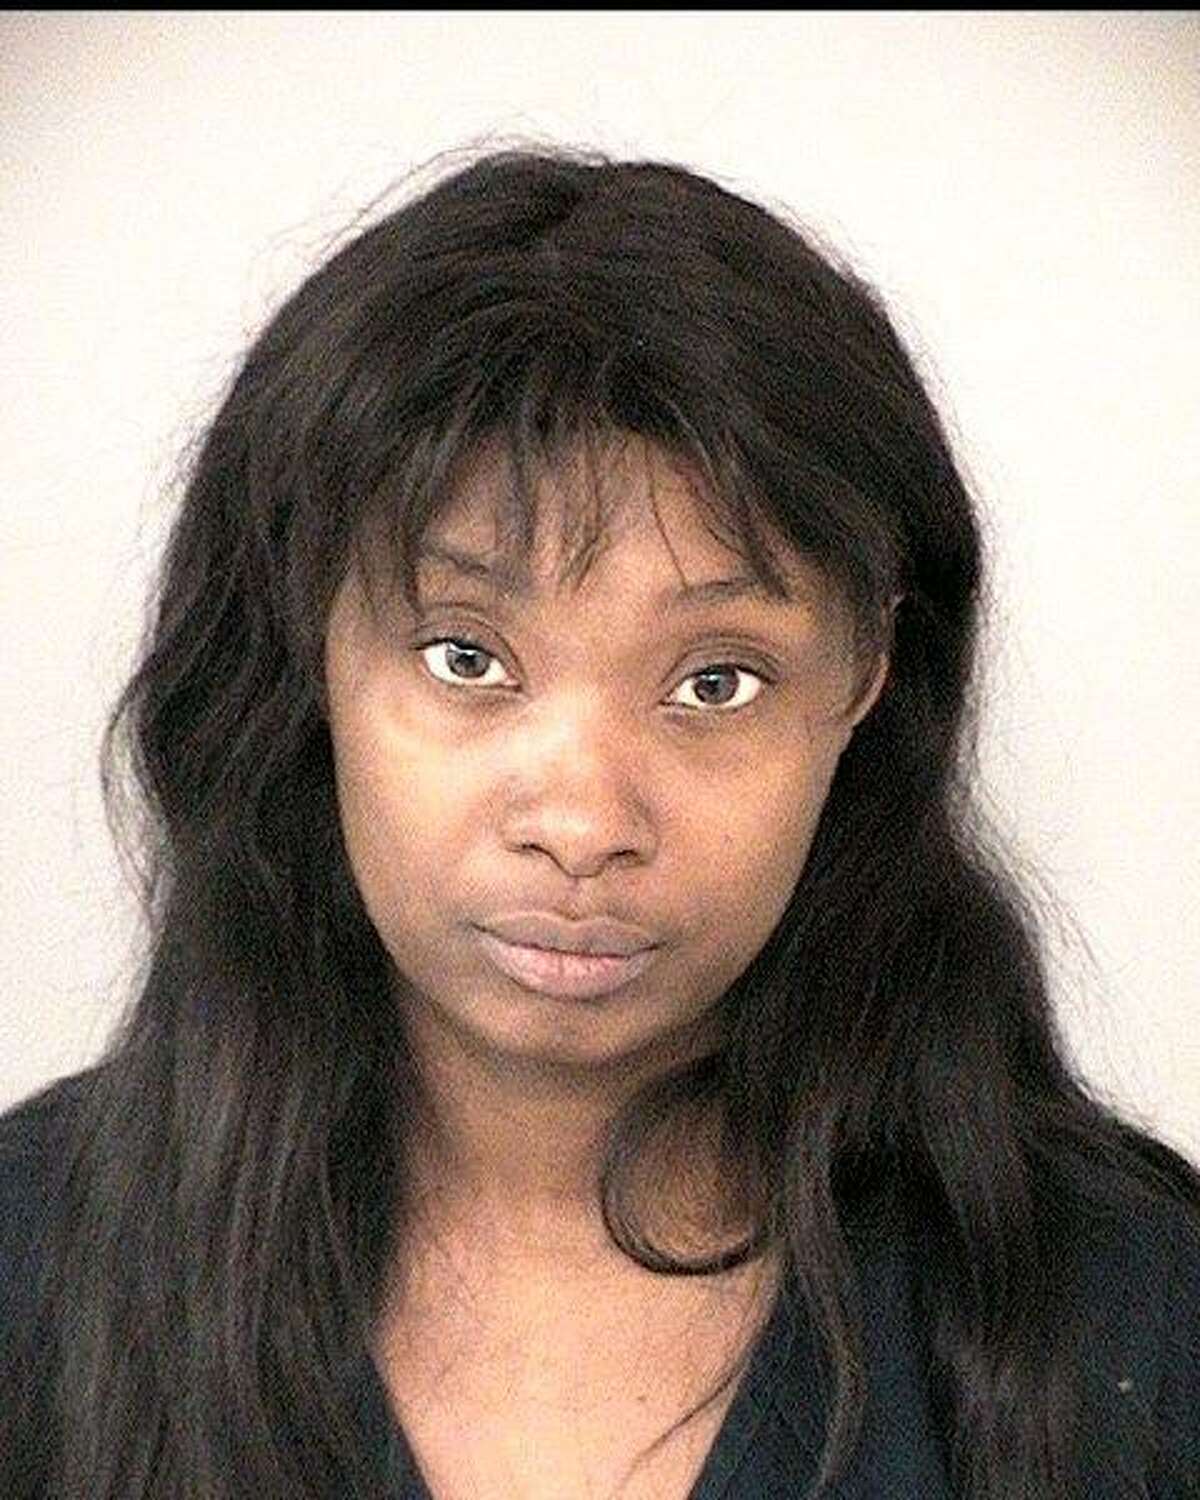 Estoshia Roddy, age 29, from Fort Bend County, was arrested March 15, 2021, for allegedly sexually assaulting a child.